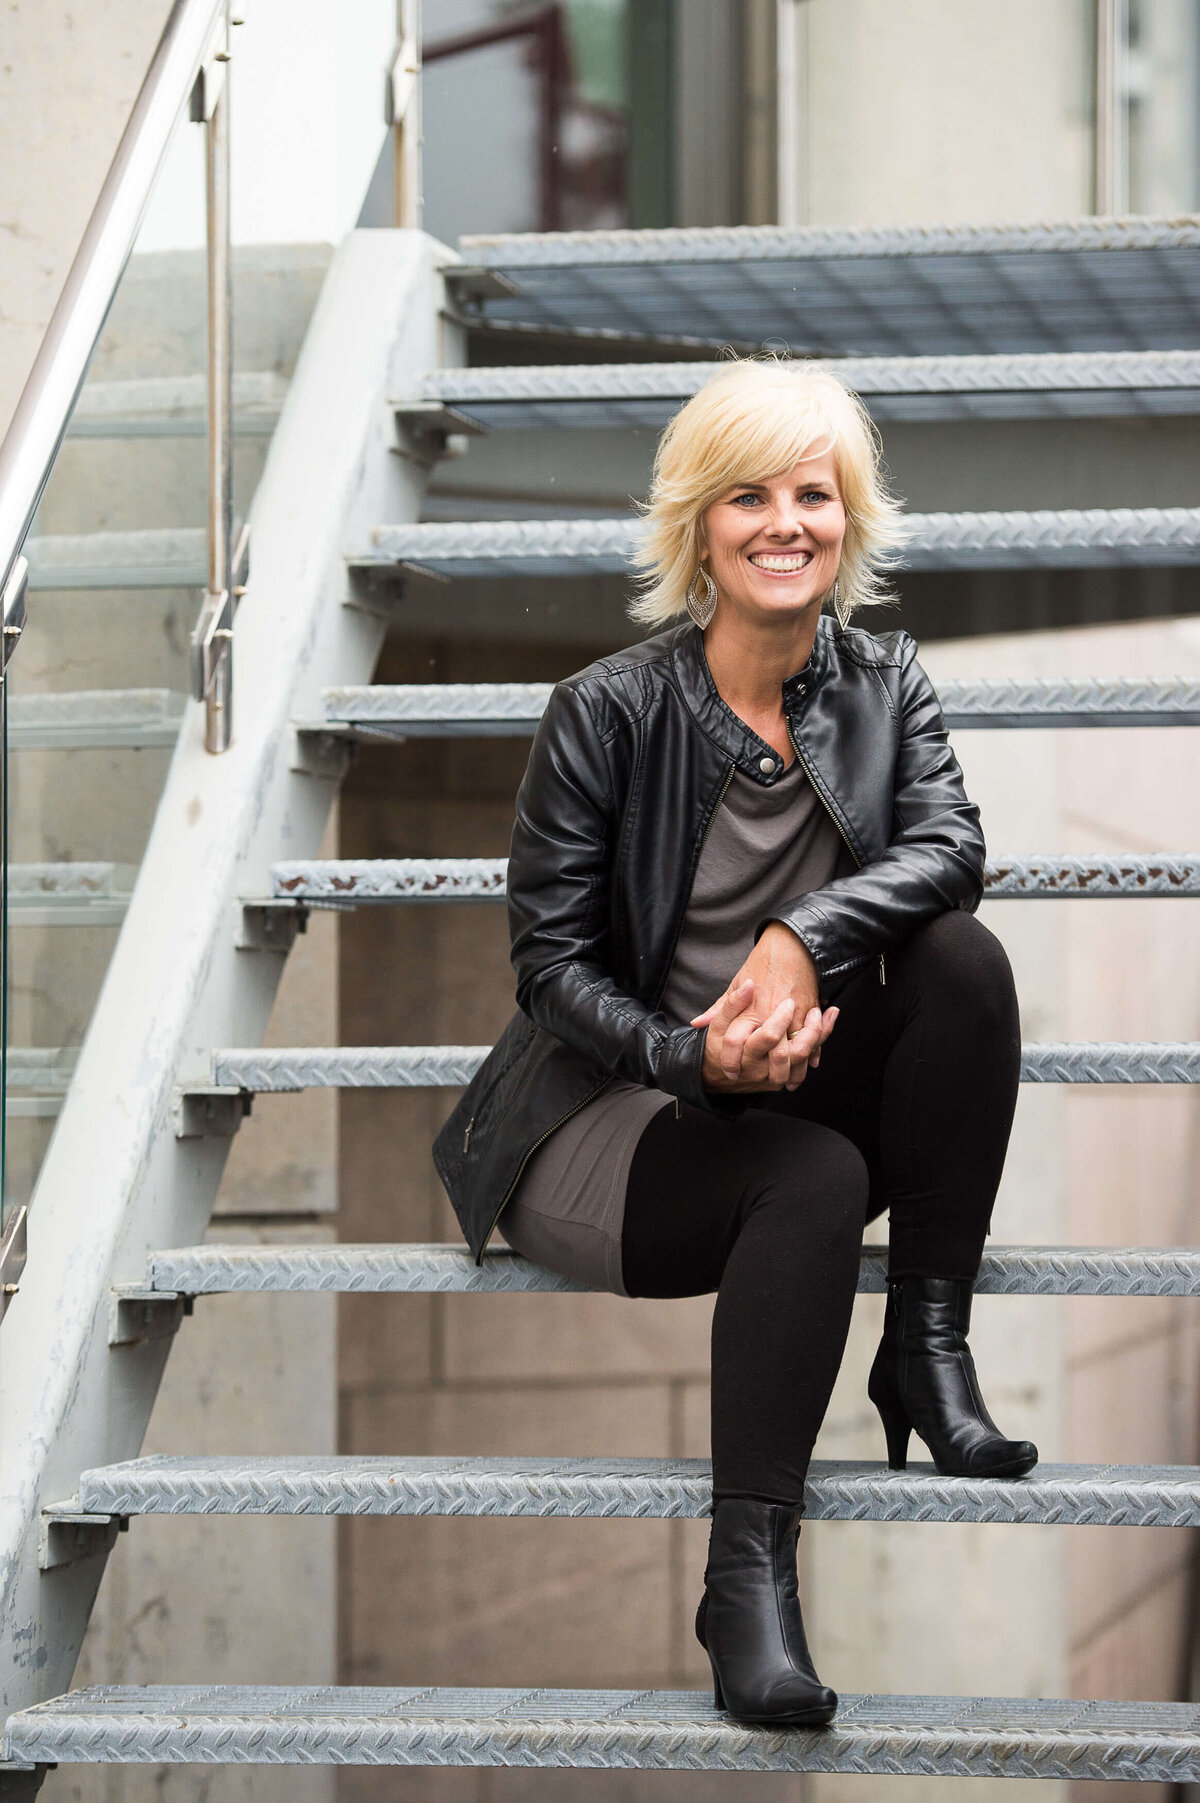 Ottawa branding photography of a woman in a leather jacket with blonde hair sitting on metal stairs in a city setting.  Captured outdoors by JEMMAN Photography COMMERCIAL